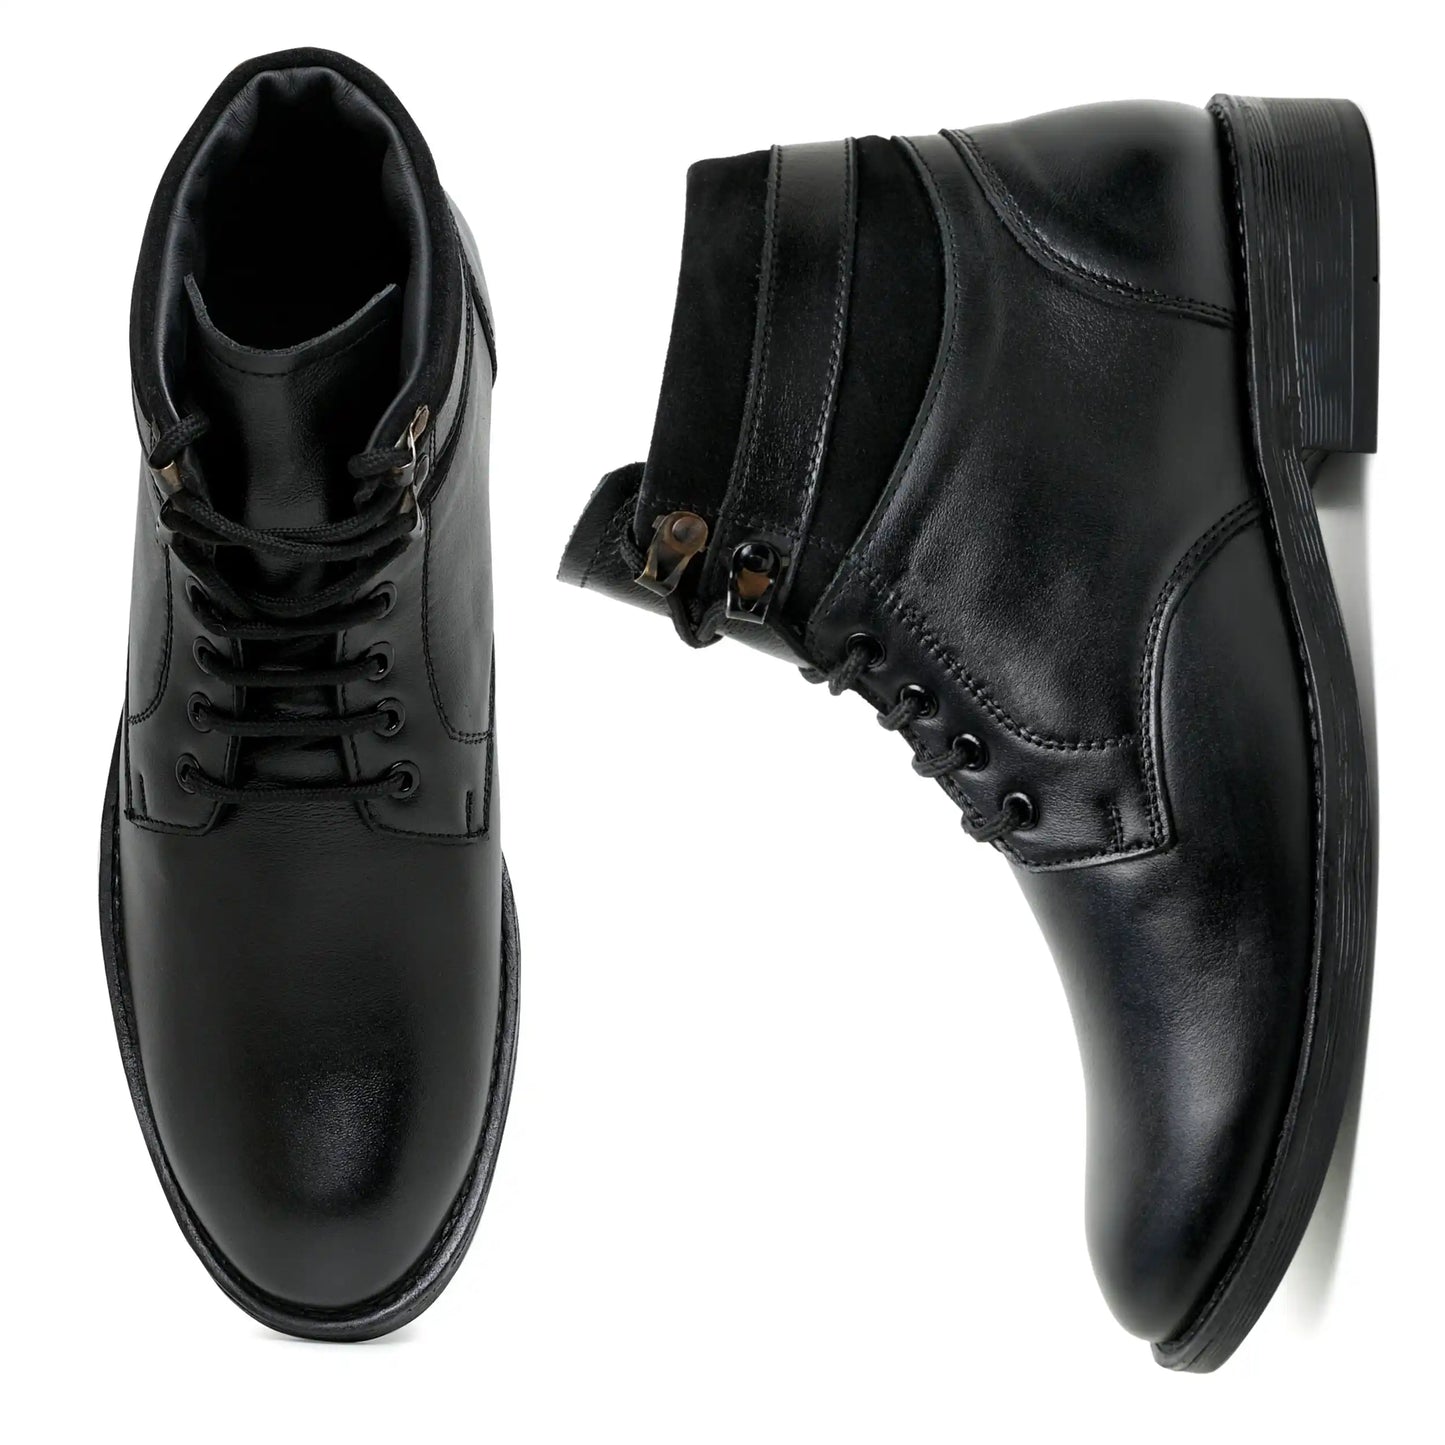 Pure Leather Boots for Men Black Ankle Shoes